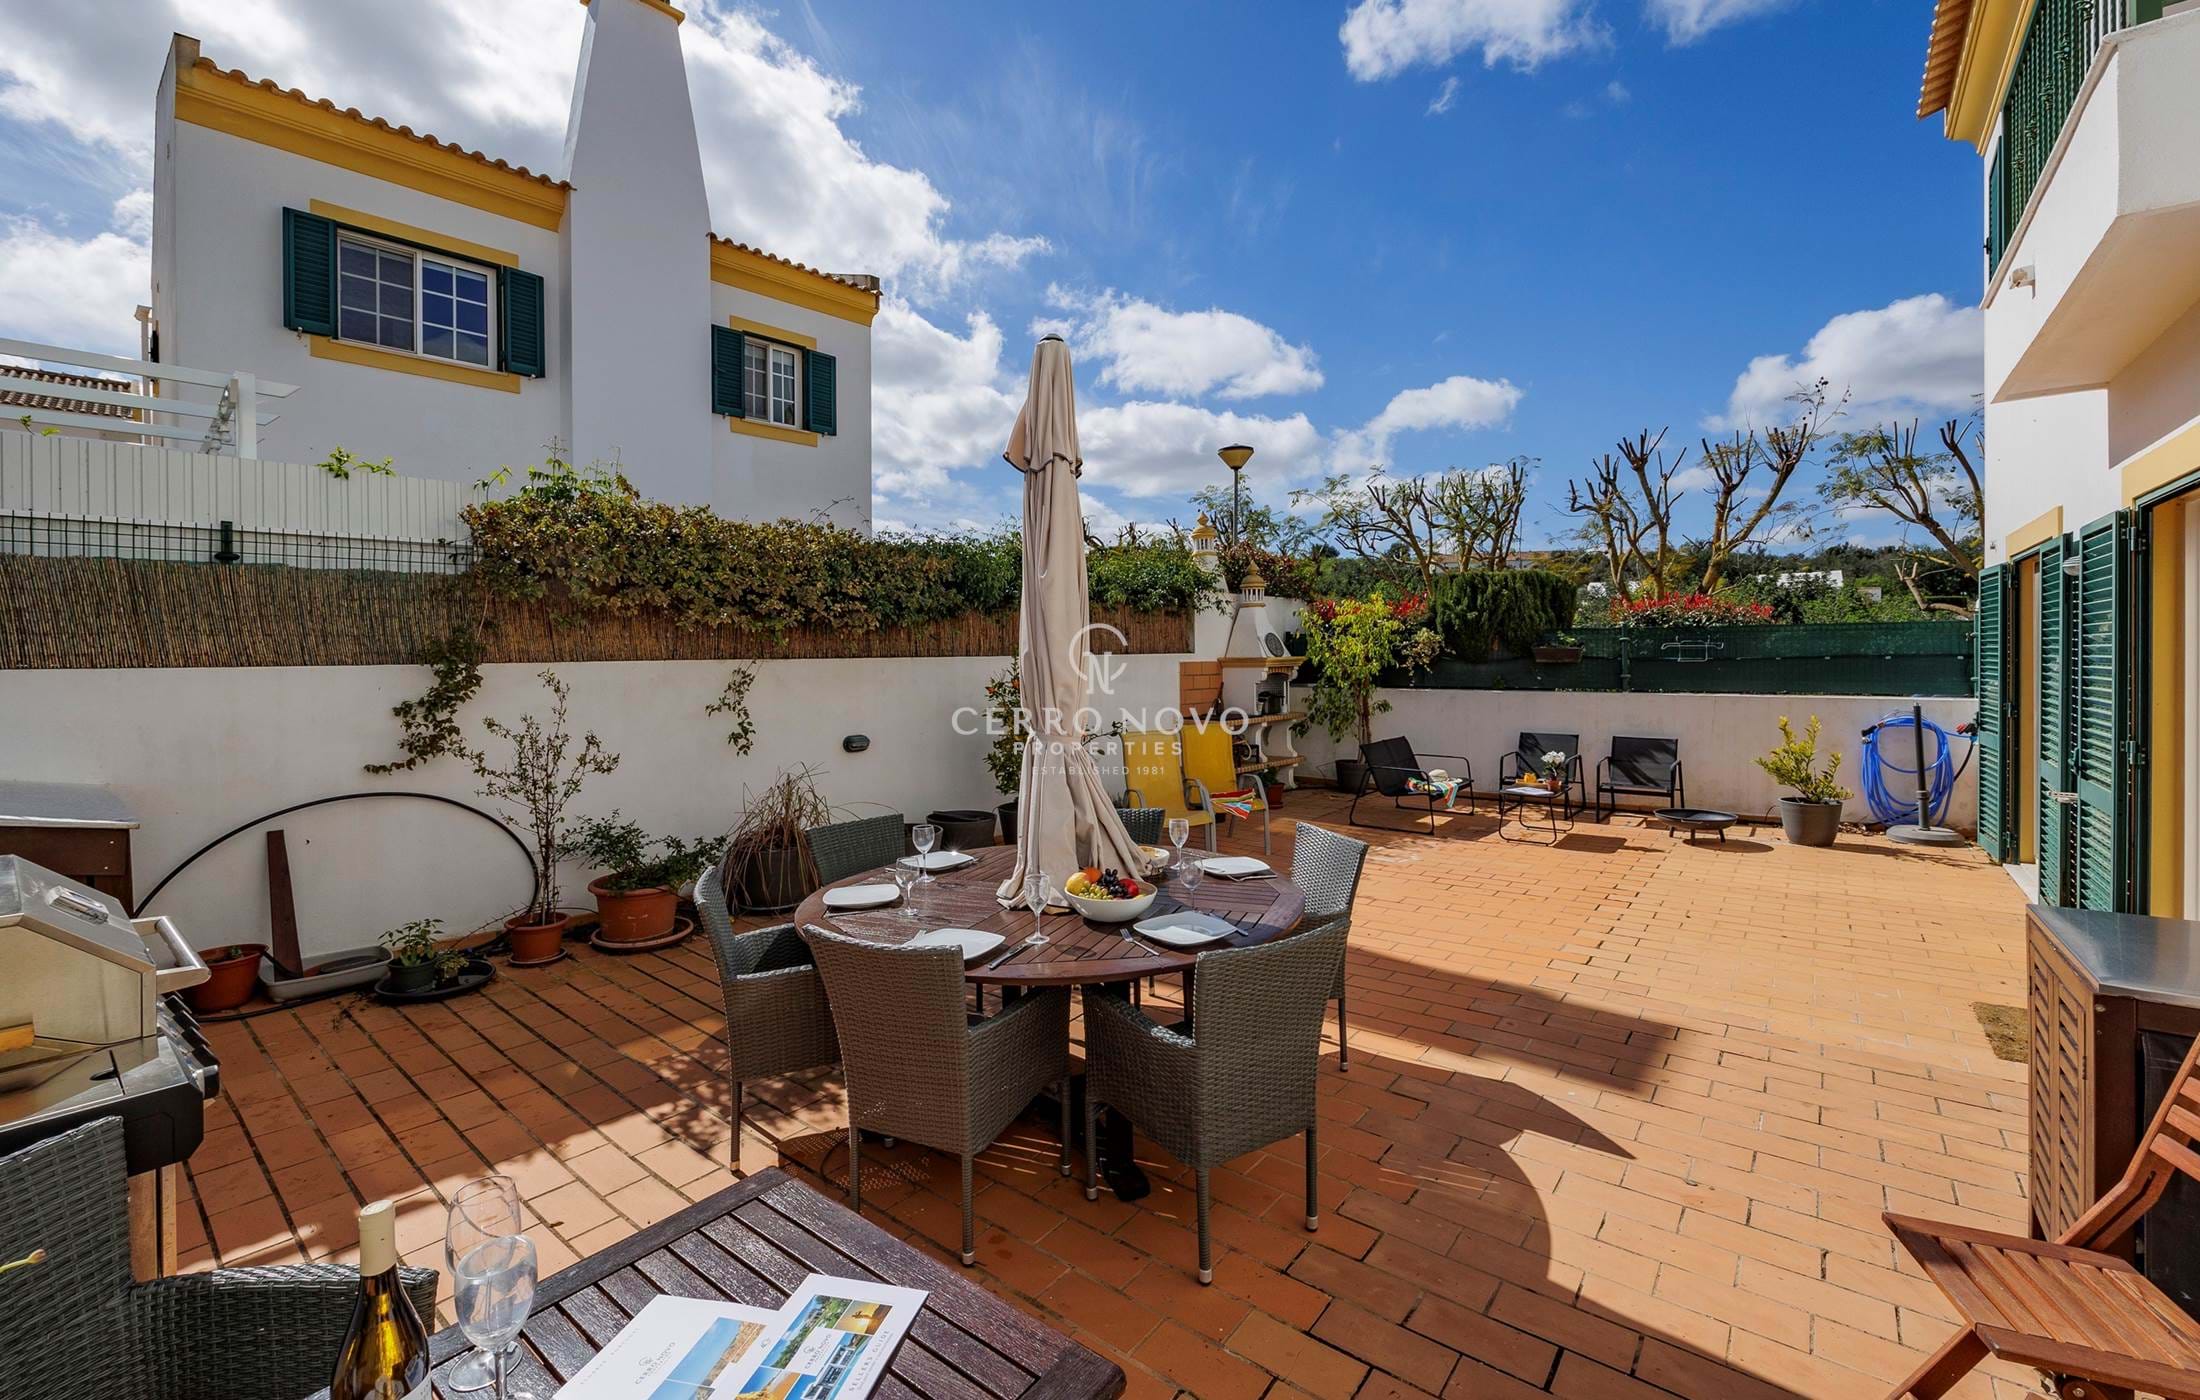  Three bedroom linked villa with garage and communal pool